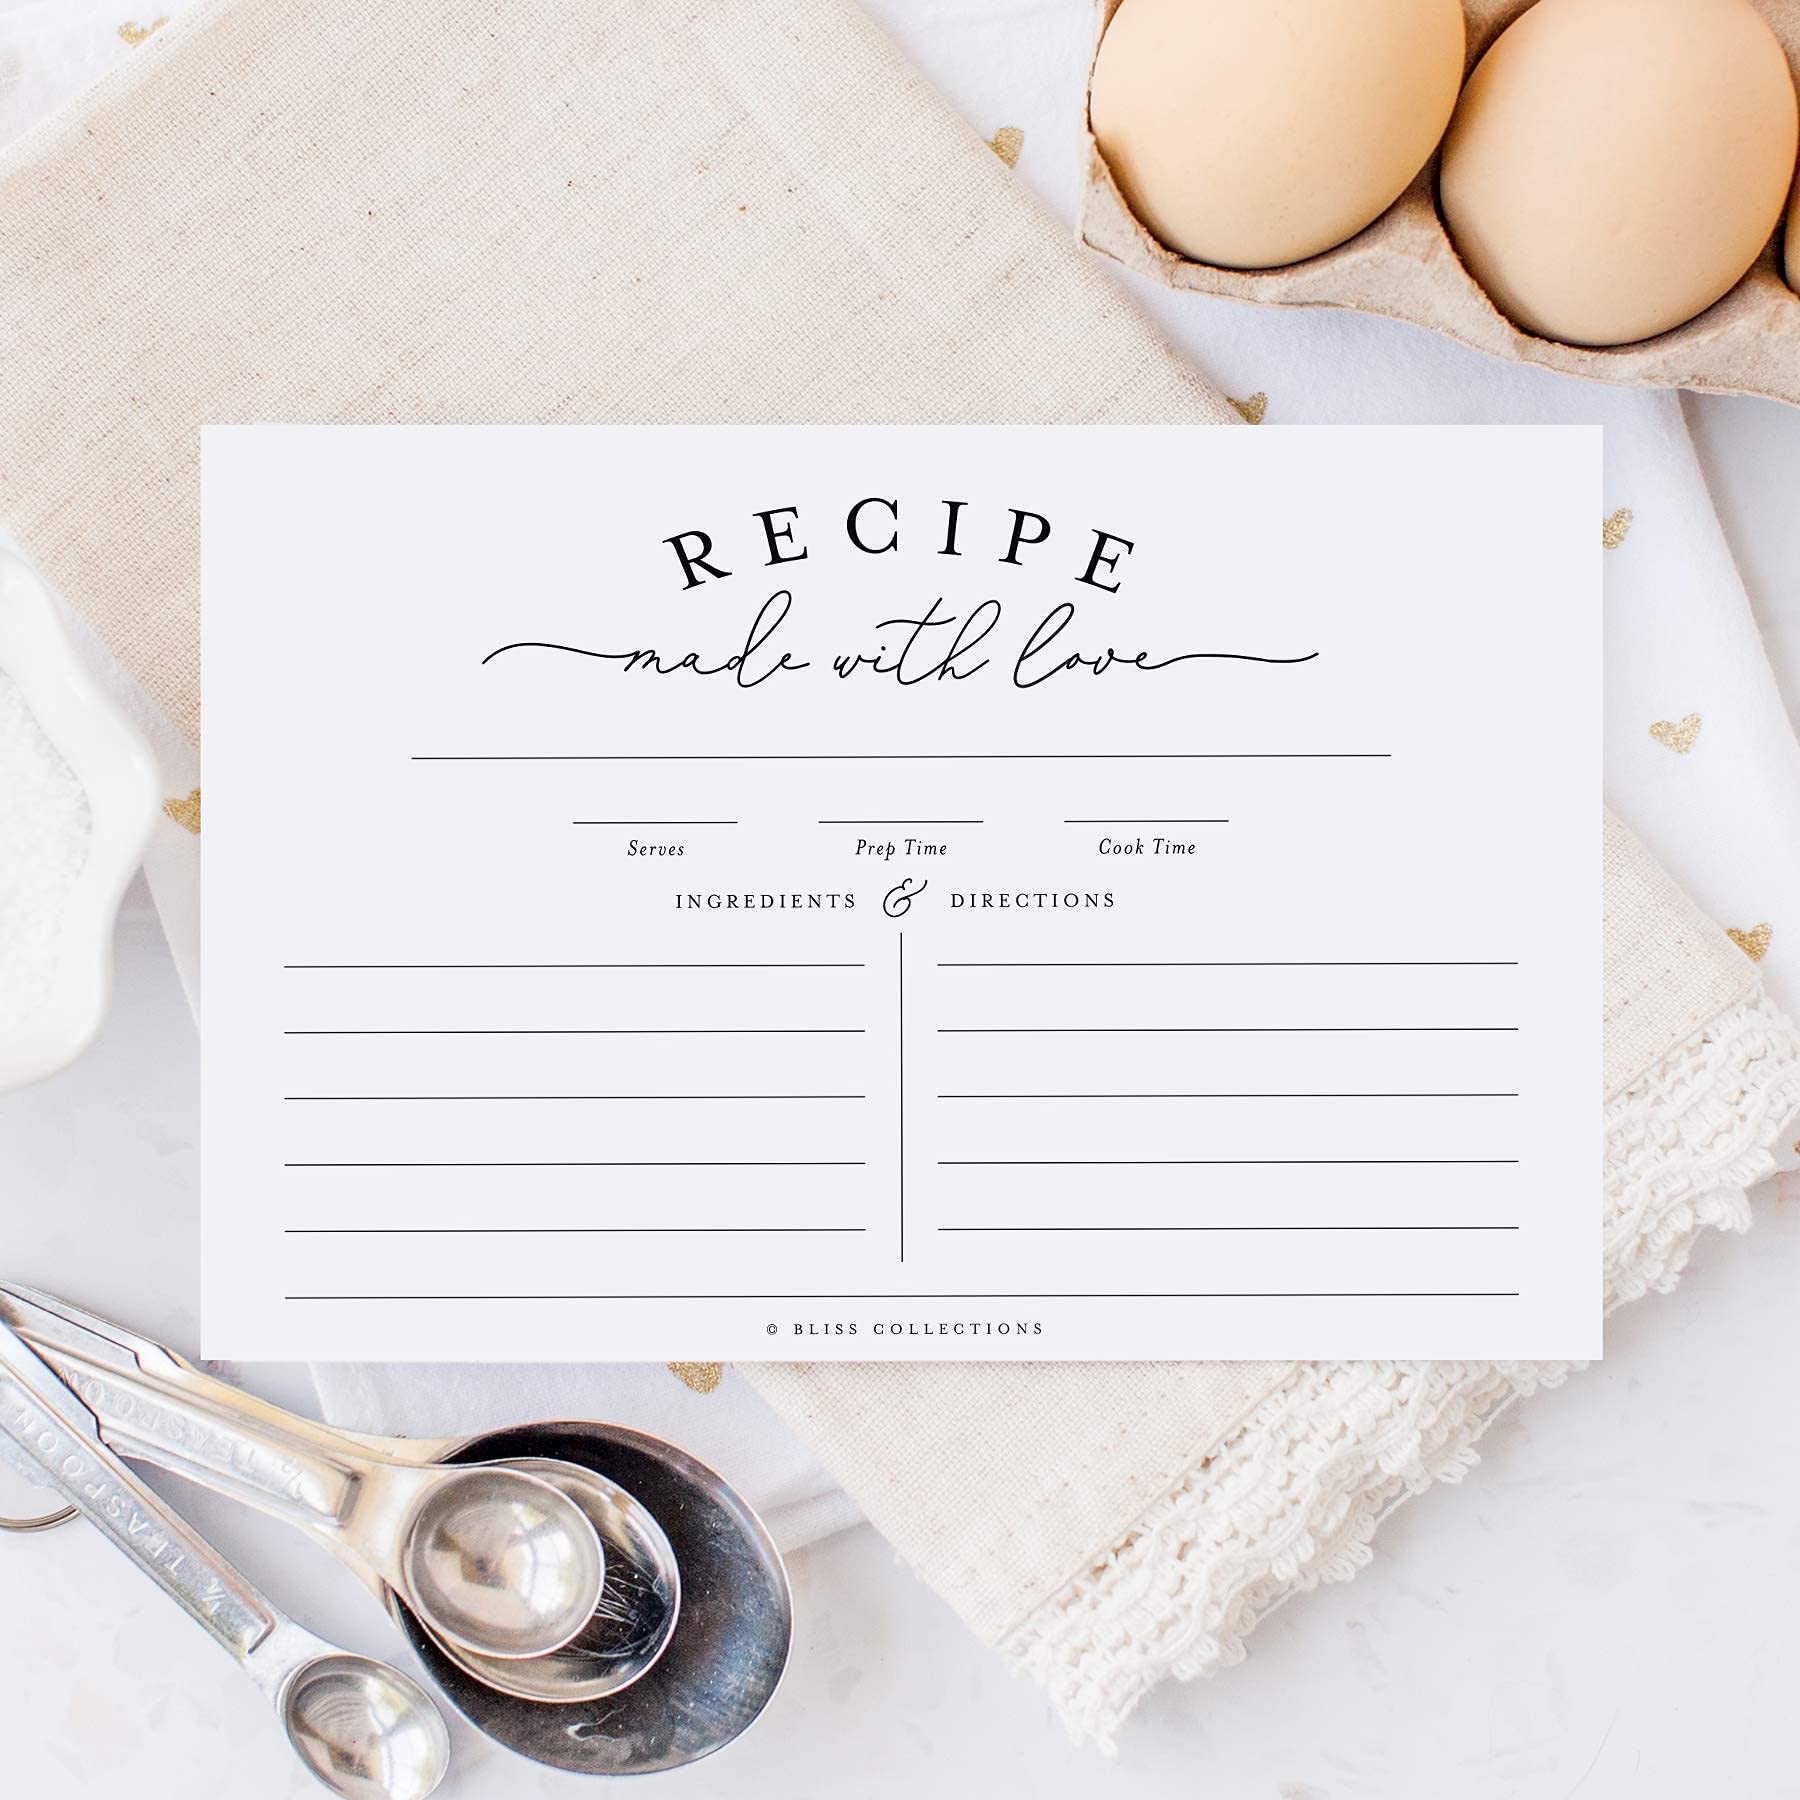 Bliss Collections Recipe Cards, Classic, Double-Sided Cards for Family Recipes, Wedding Showers, Bridal Showers, Baby Showers and Housewarming Gifts, 4"x6" (50 Cards)